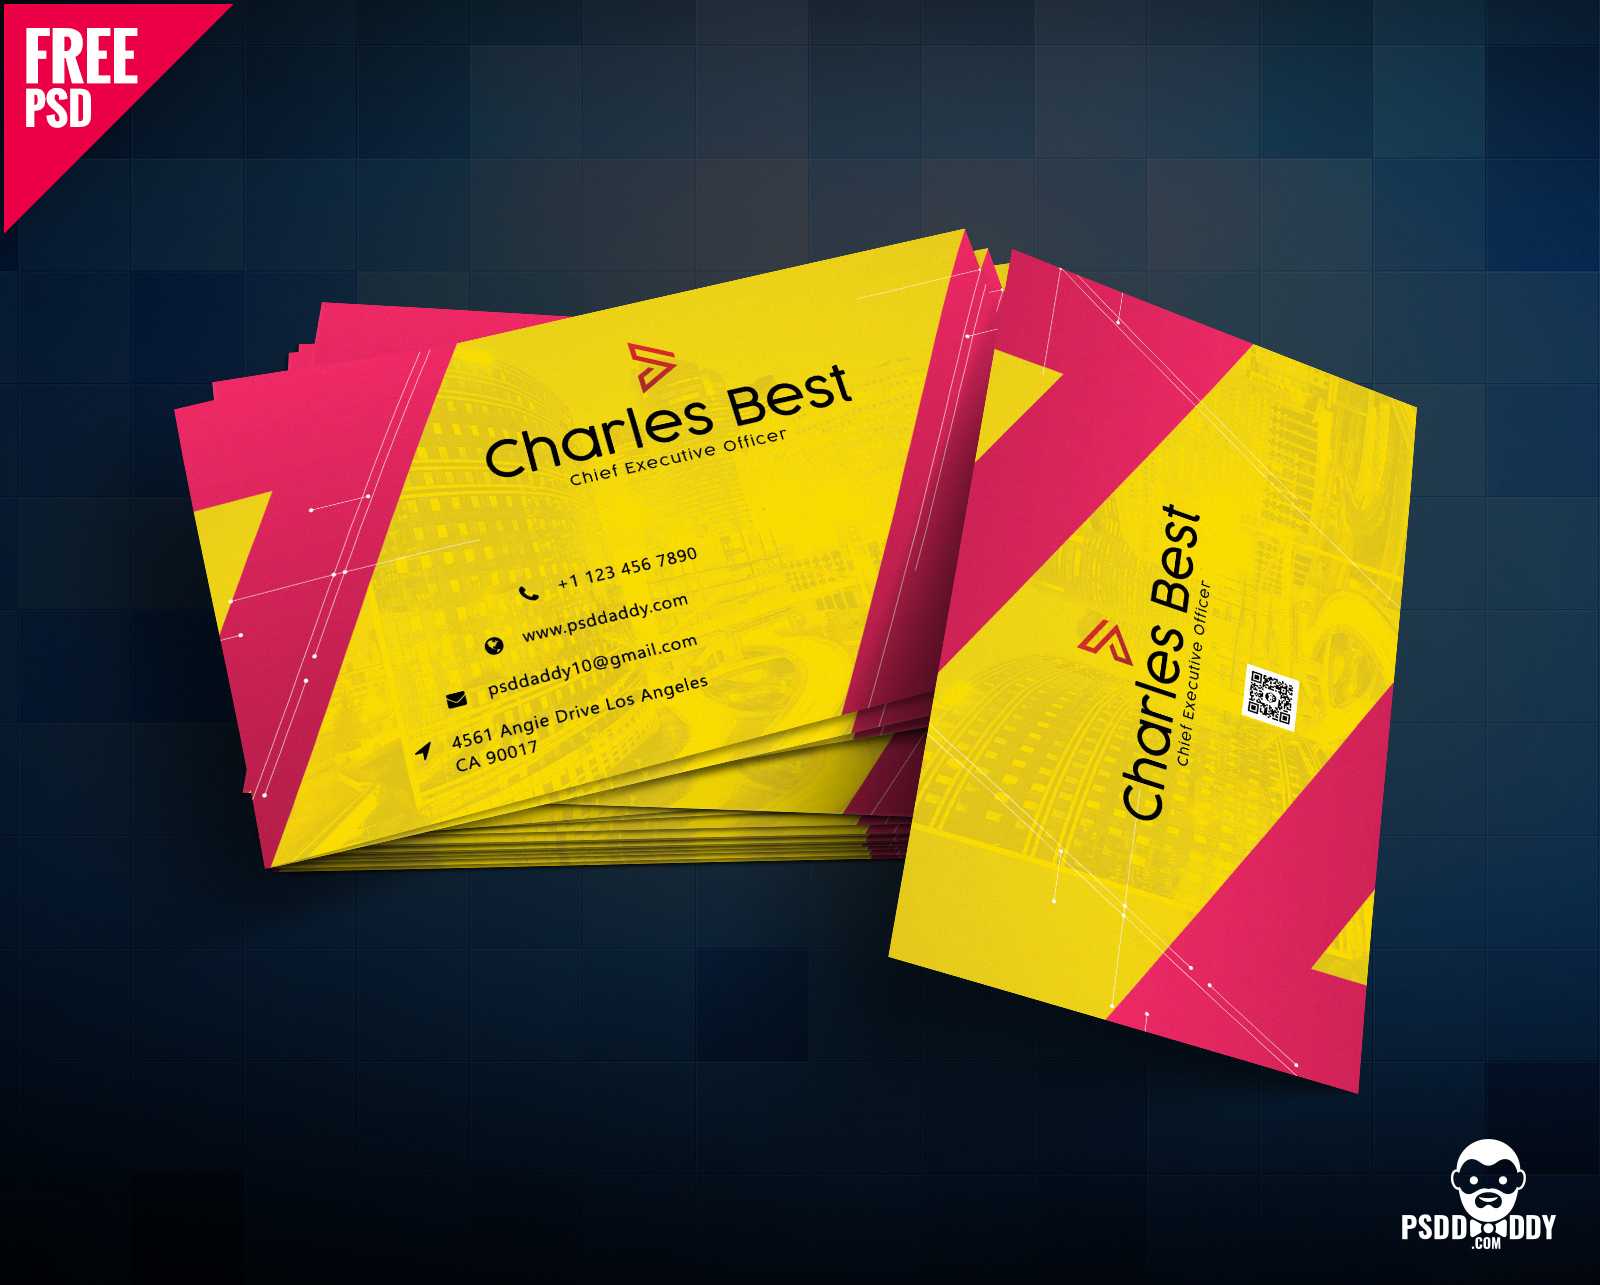 Download] Creative Business Card Free Psd | Psddaddy Inside Photoshop Business Card Template With Bleed